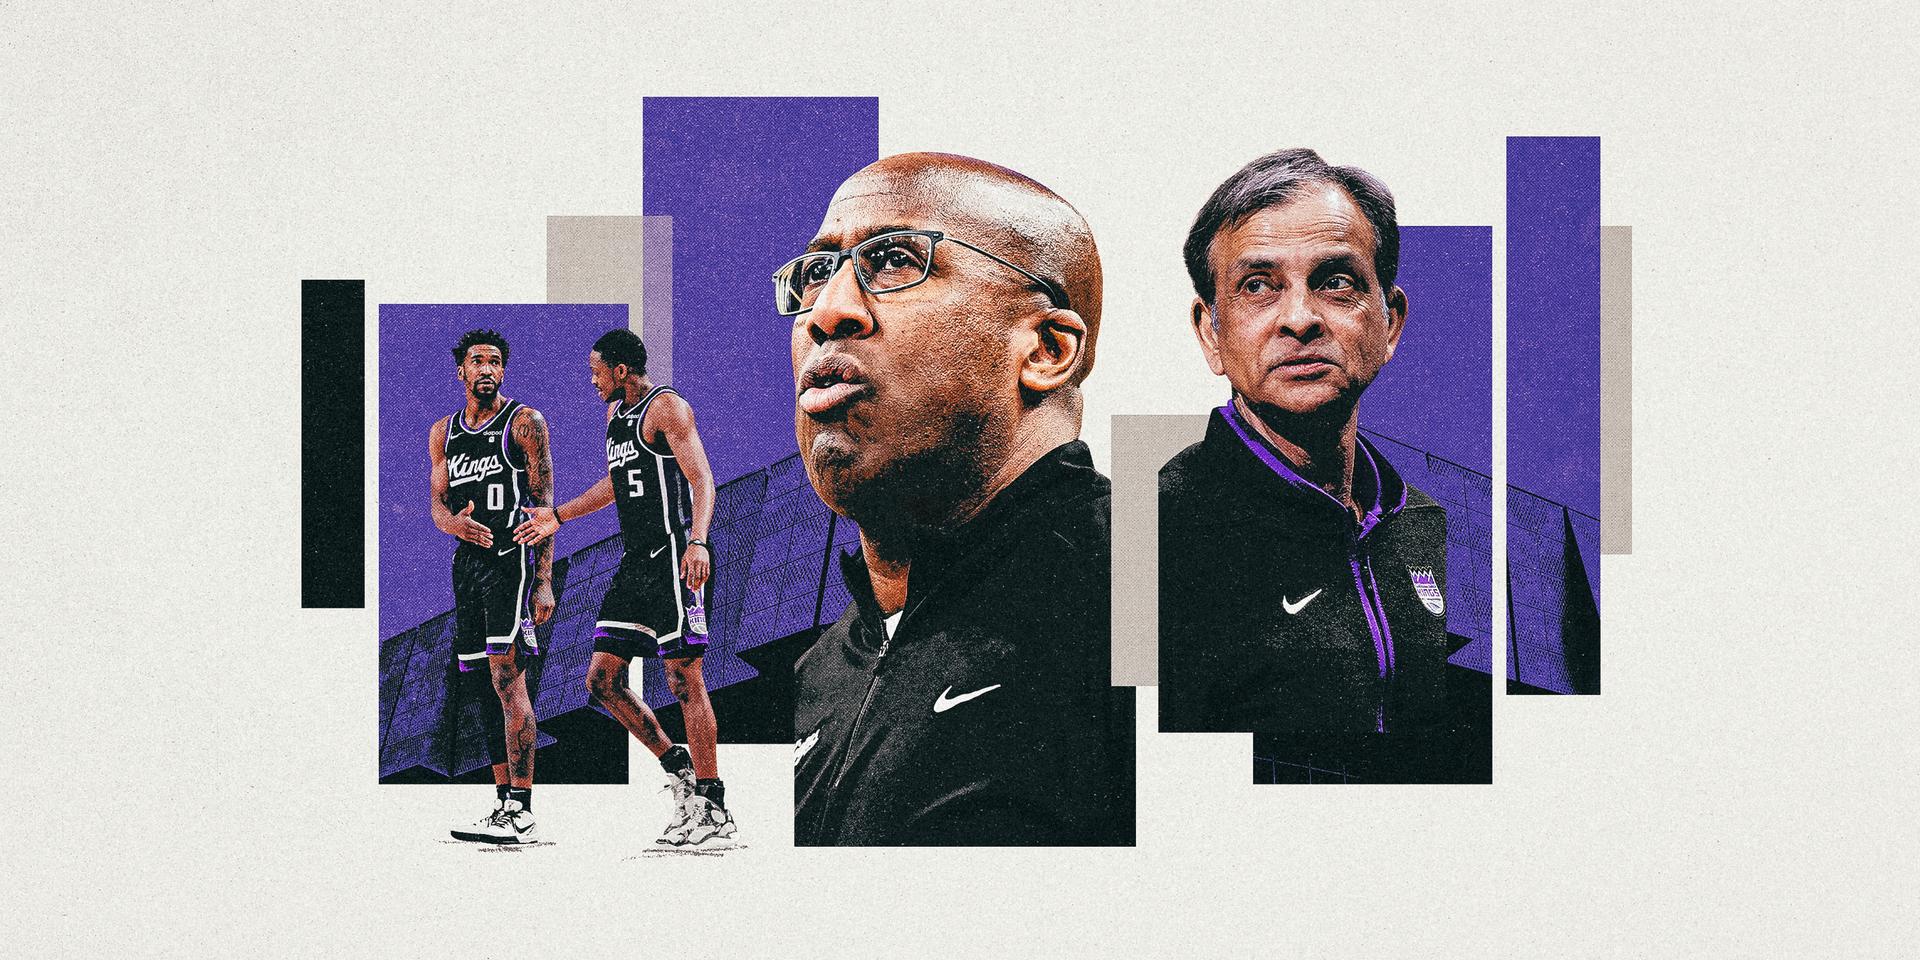 Dangerous games: What’s next for Mike Brown, Vivek Ranadivé and the Sacramento Kings